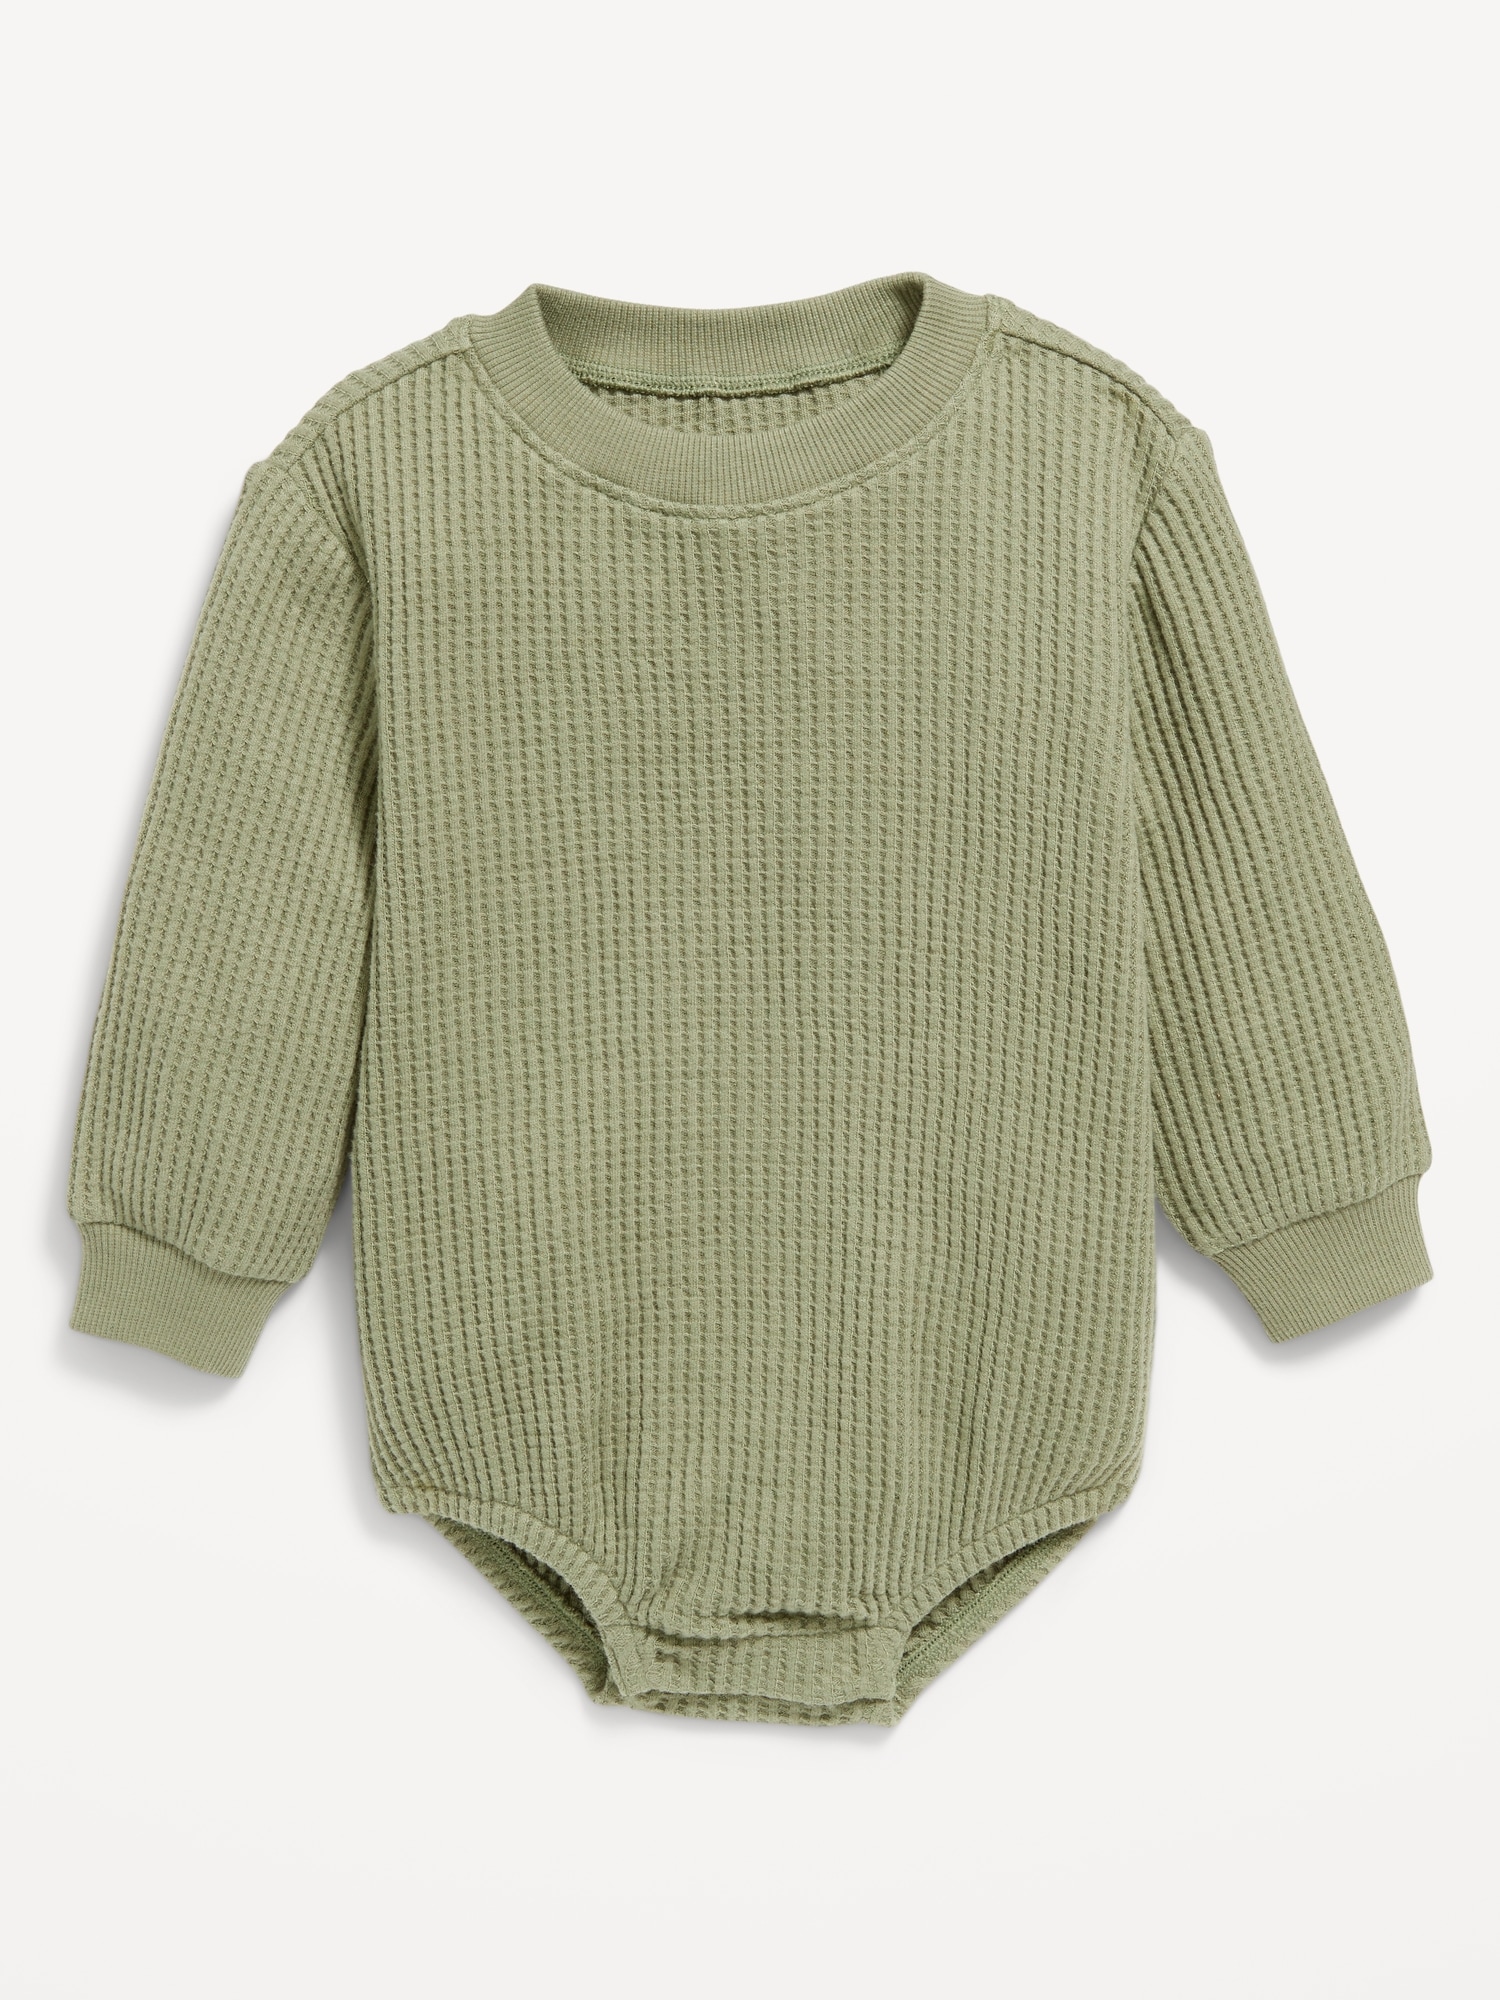 Long-Sleeve Thermal-Knit Romper for Baby